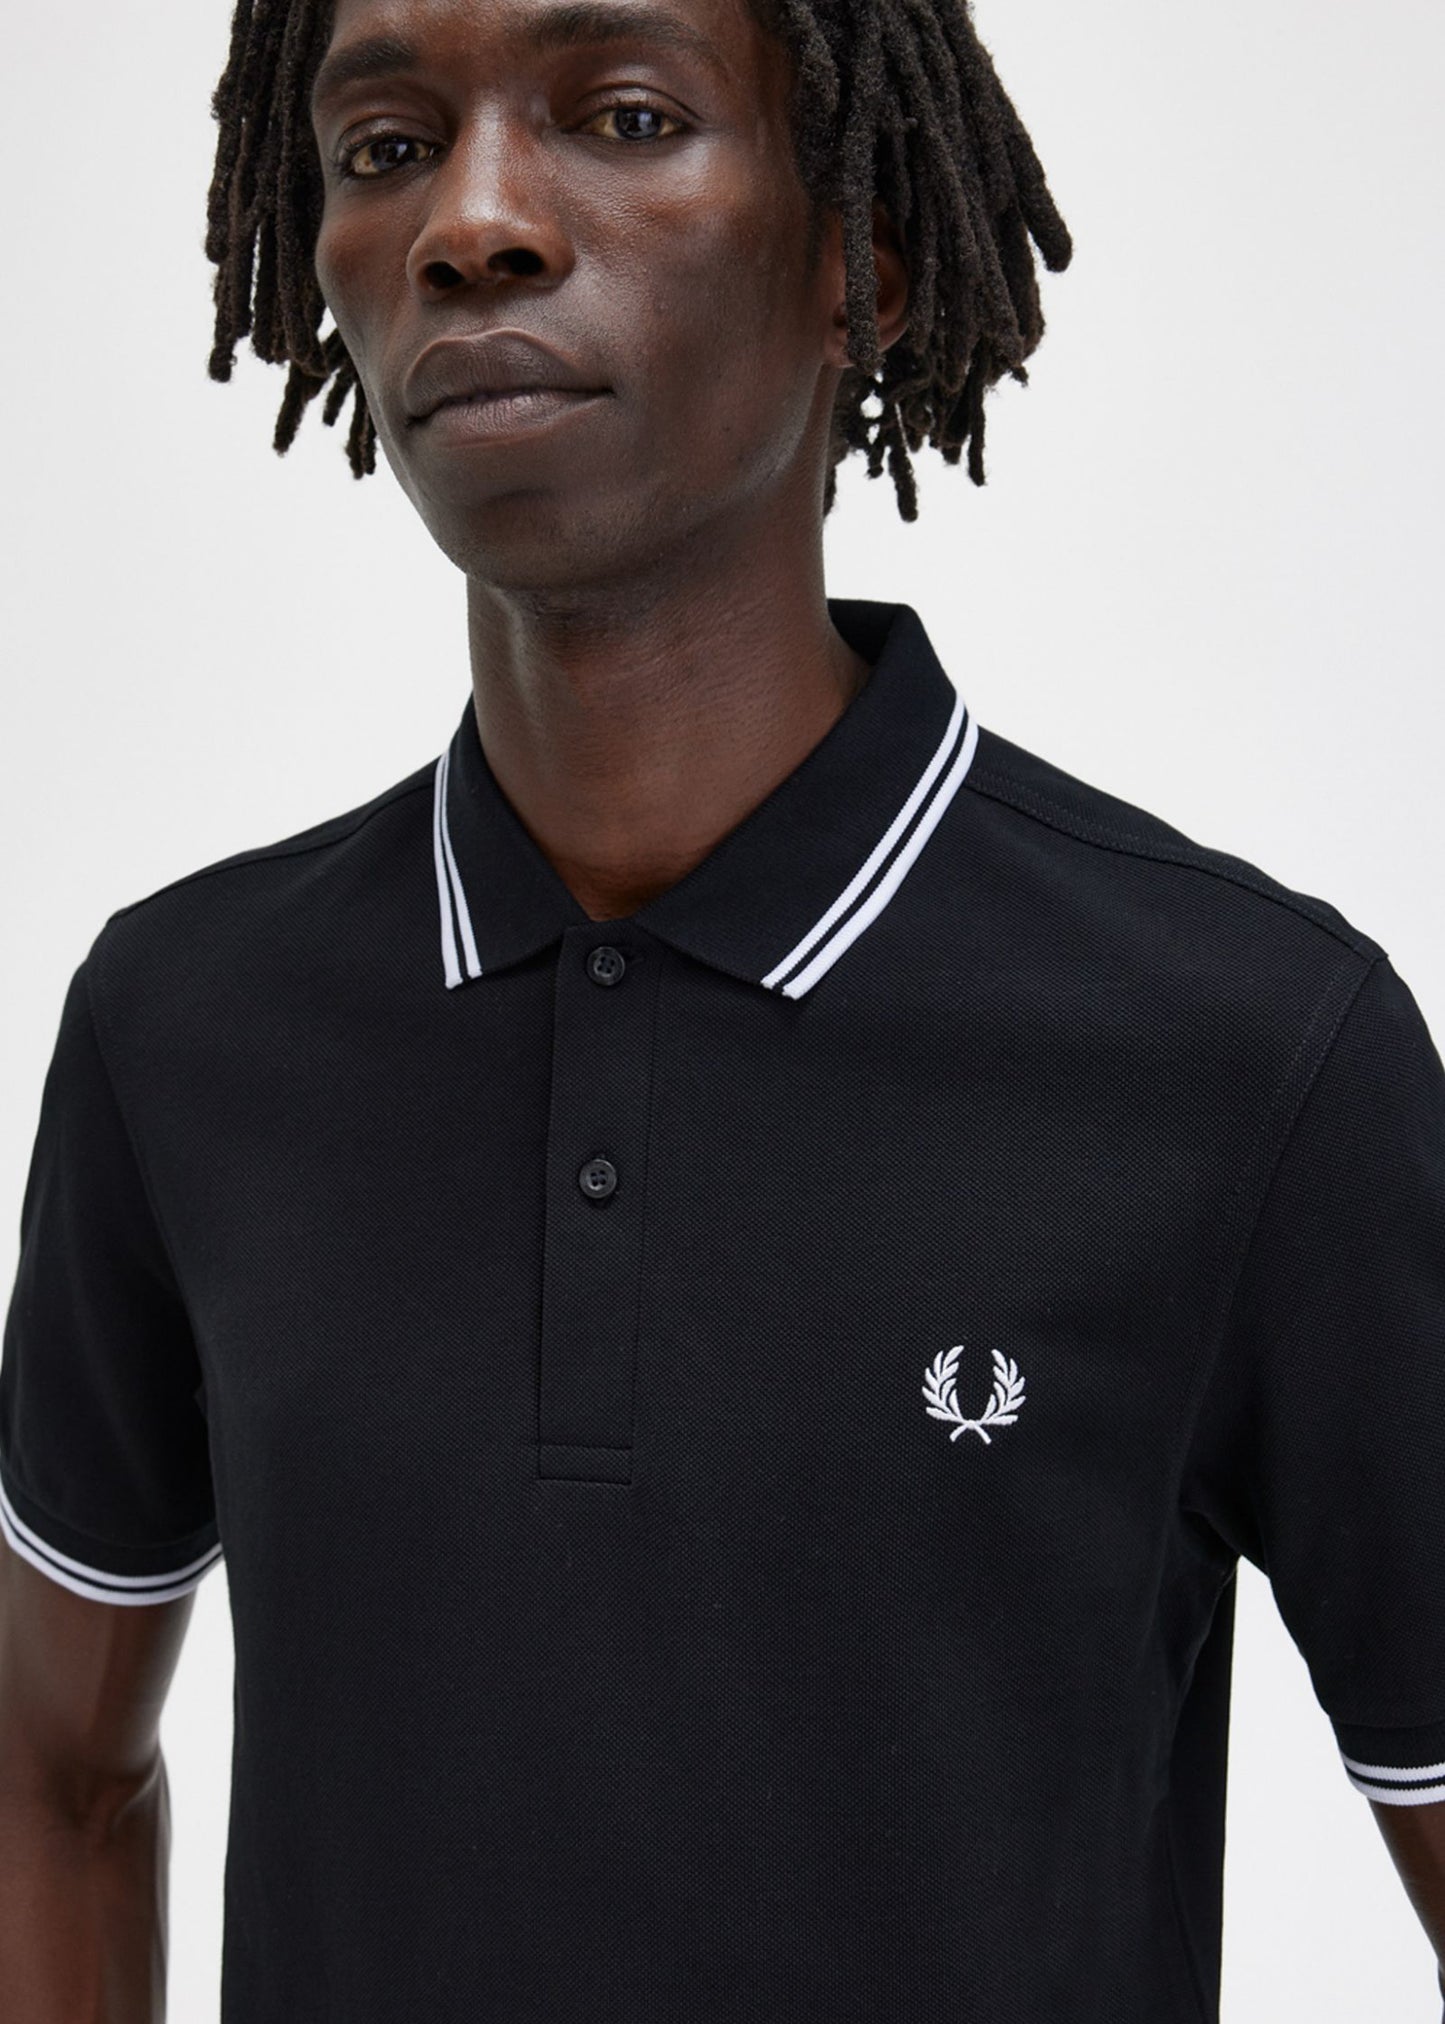 Twin tipped fred perry shirt - black white white